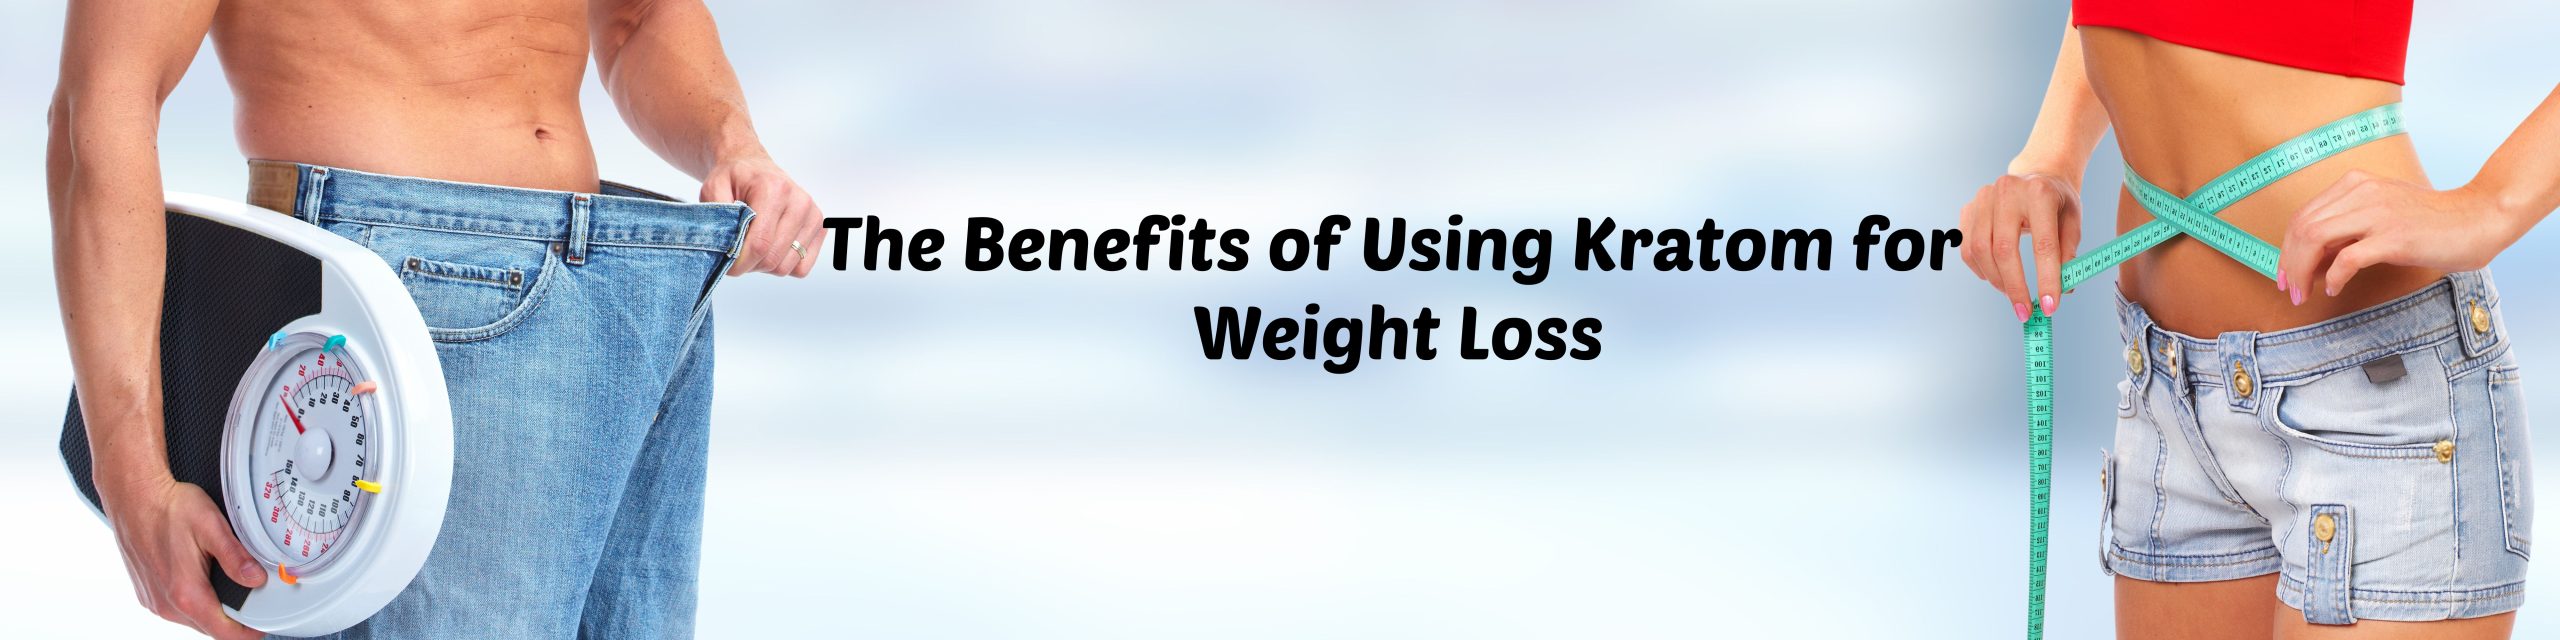 image of benefits of using kratom for weight loss